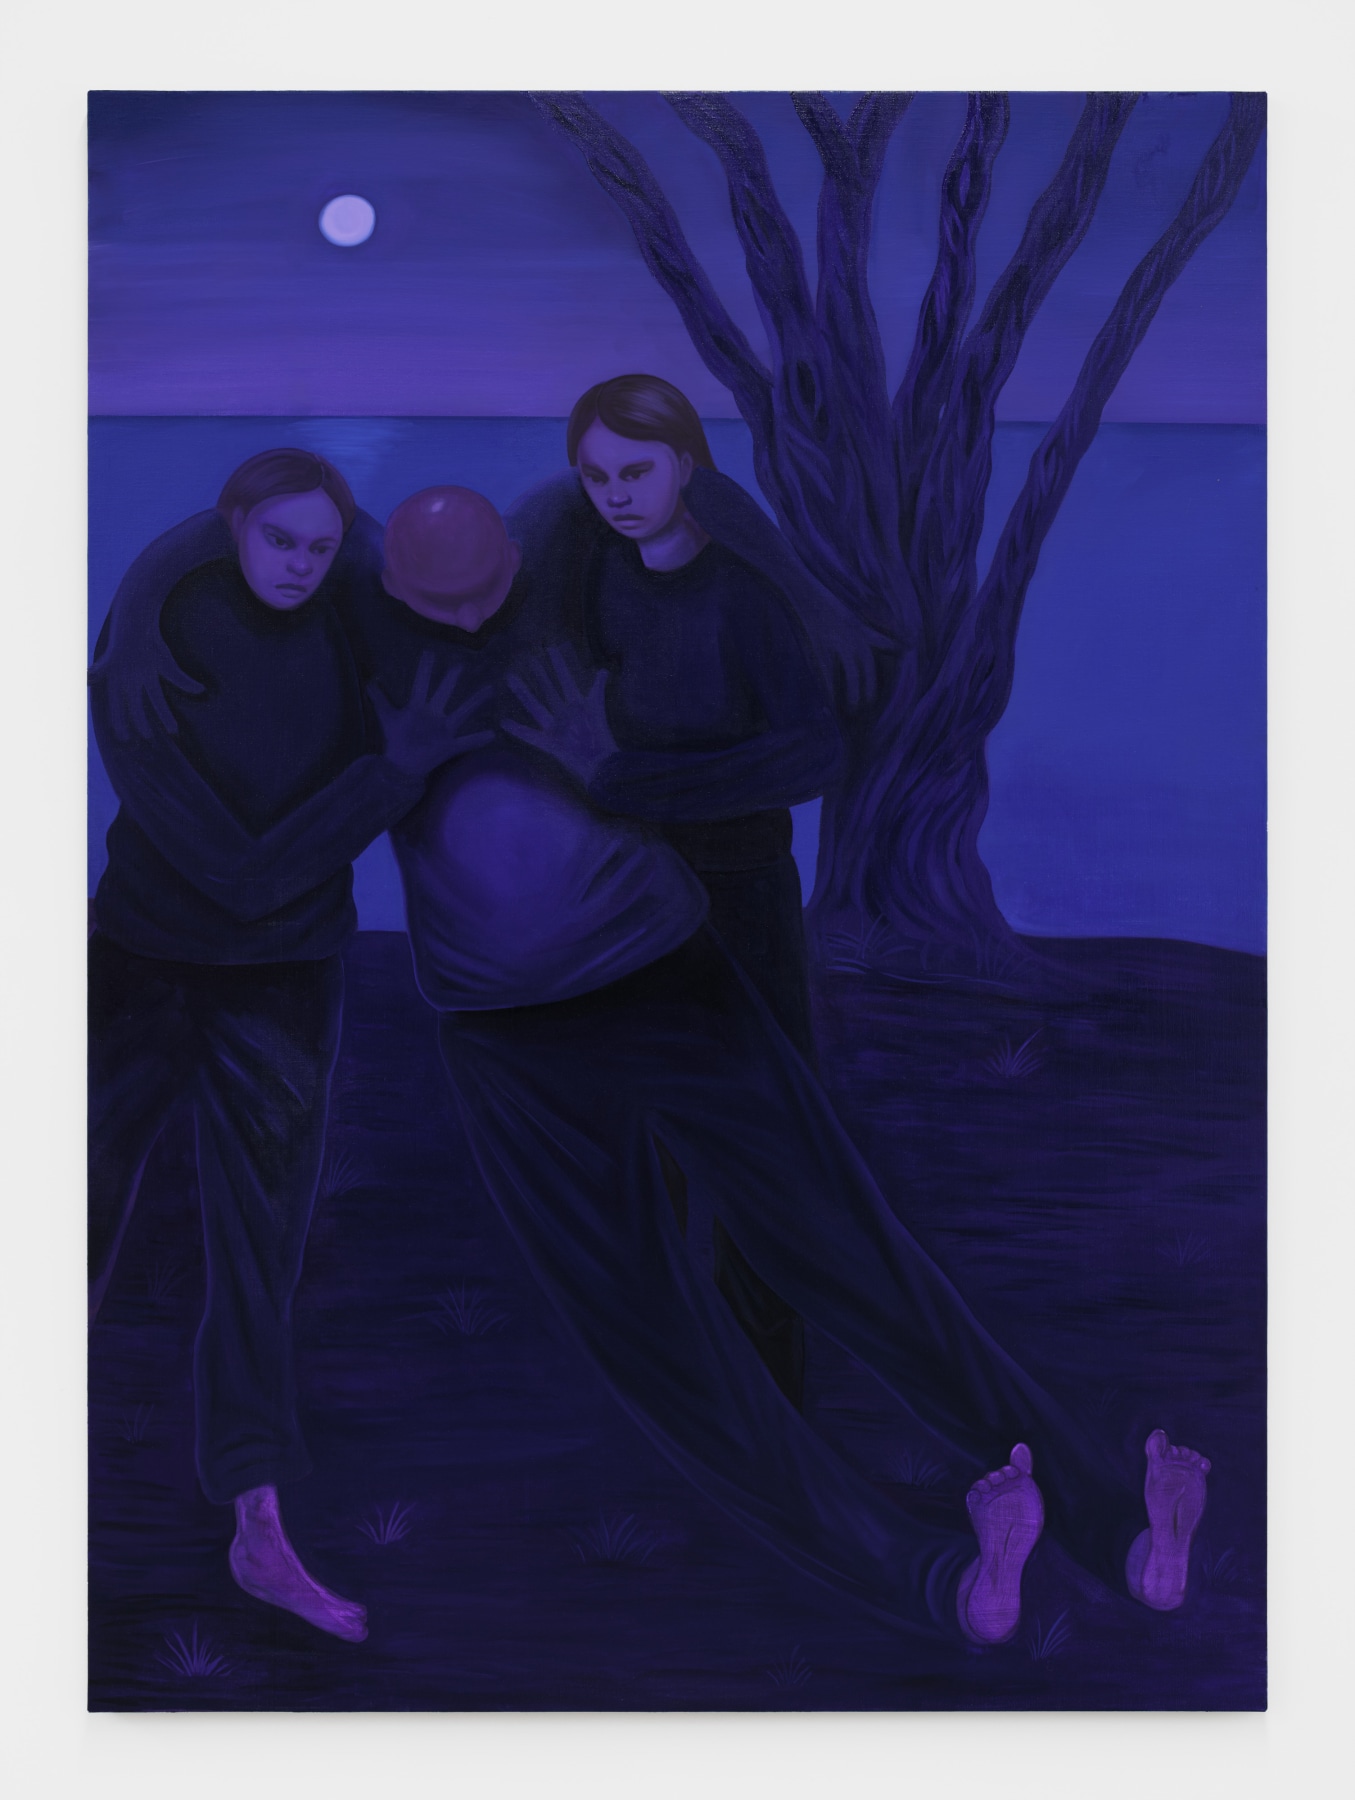 Bambou Gili's artwork "The Drunk". In the dark of night under a full moon two women carry an intoxicated man through the woods . 66 x 48 in (167.6 x 121.9 cm), oil on linen, 2023